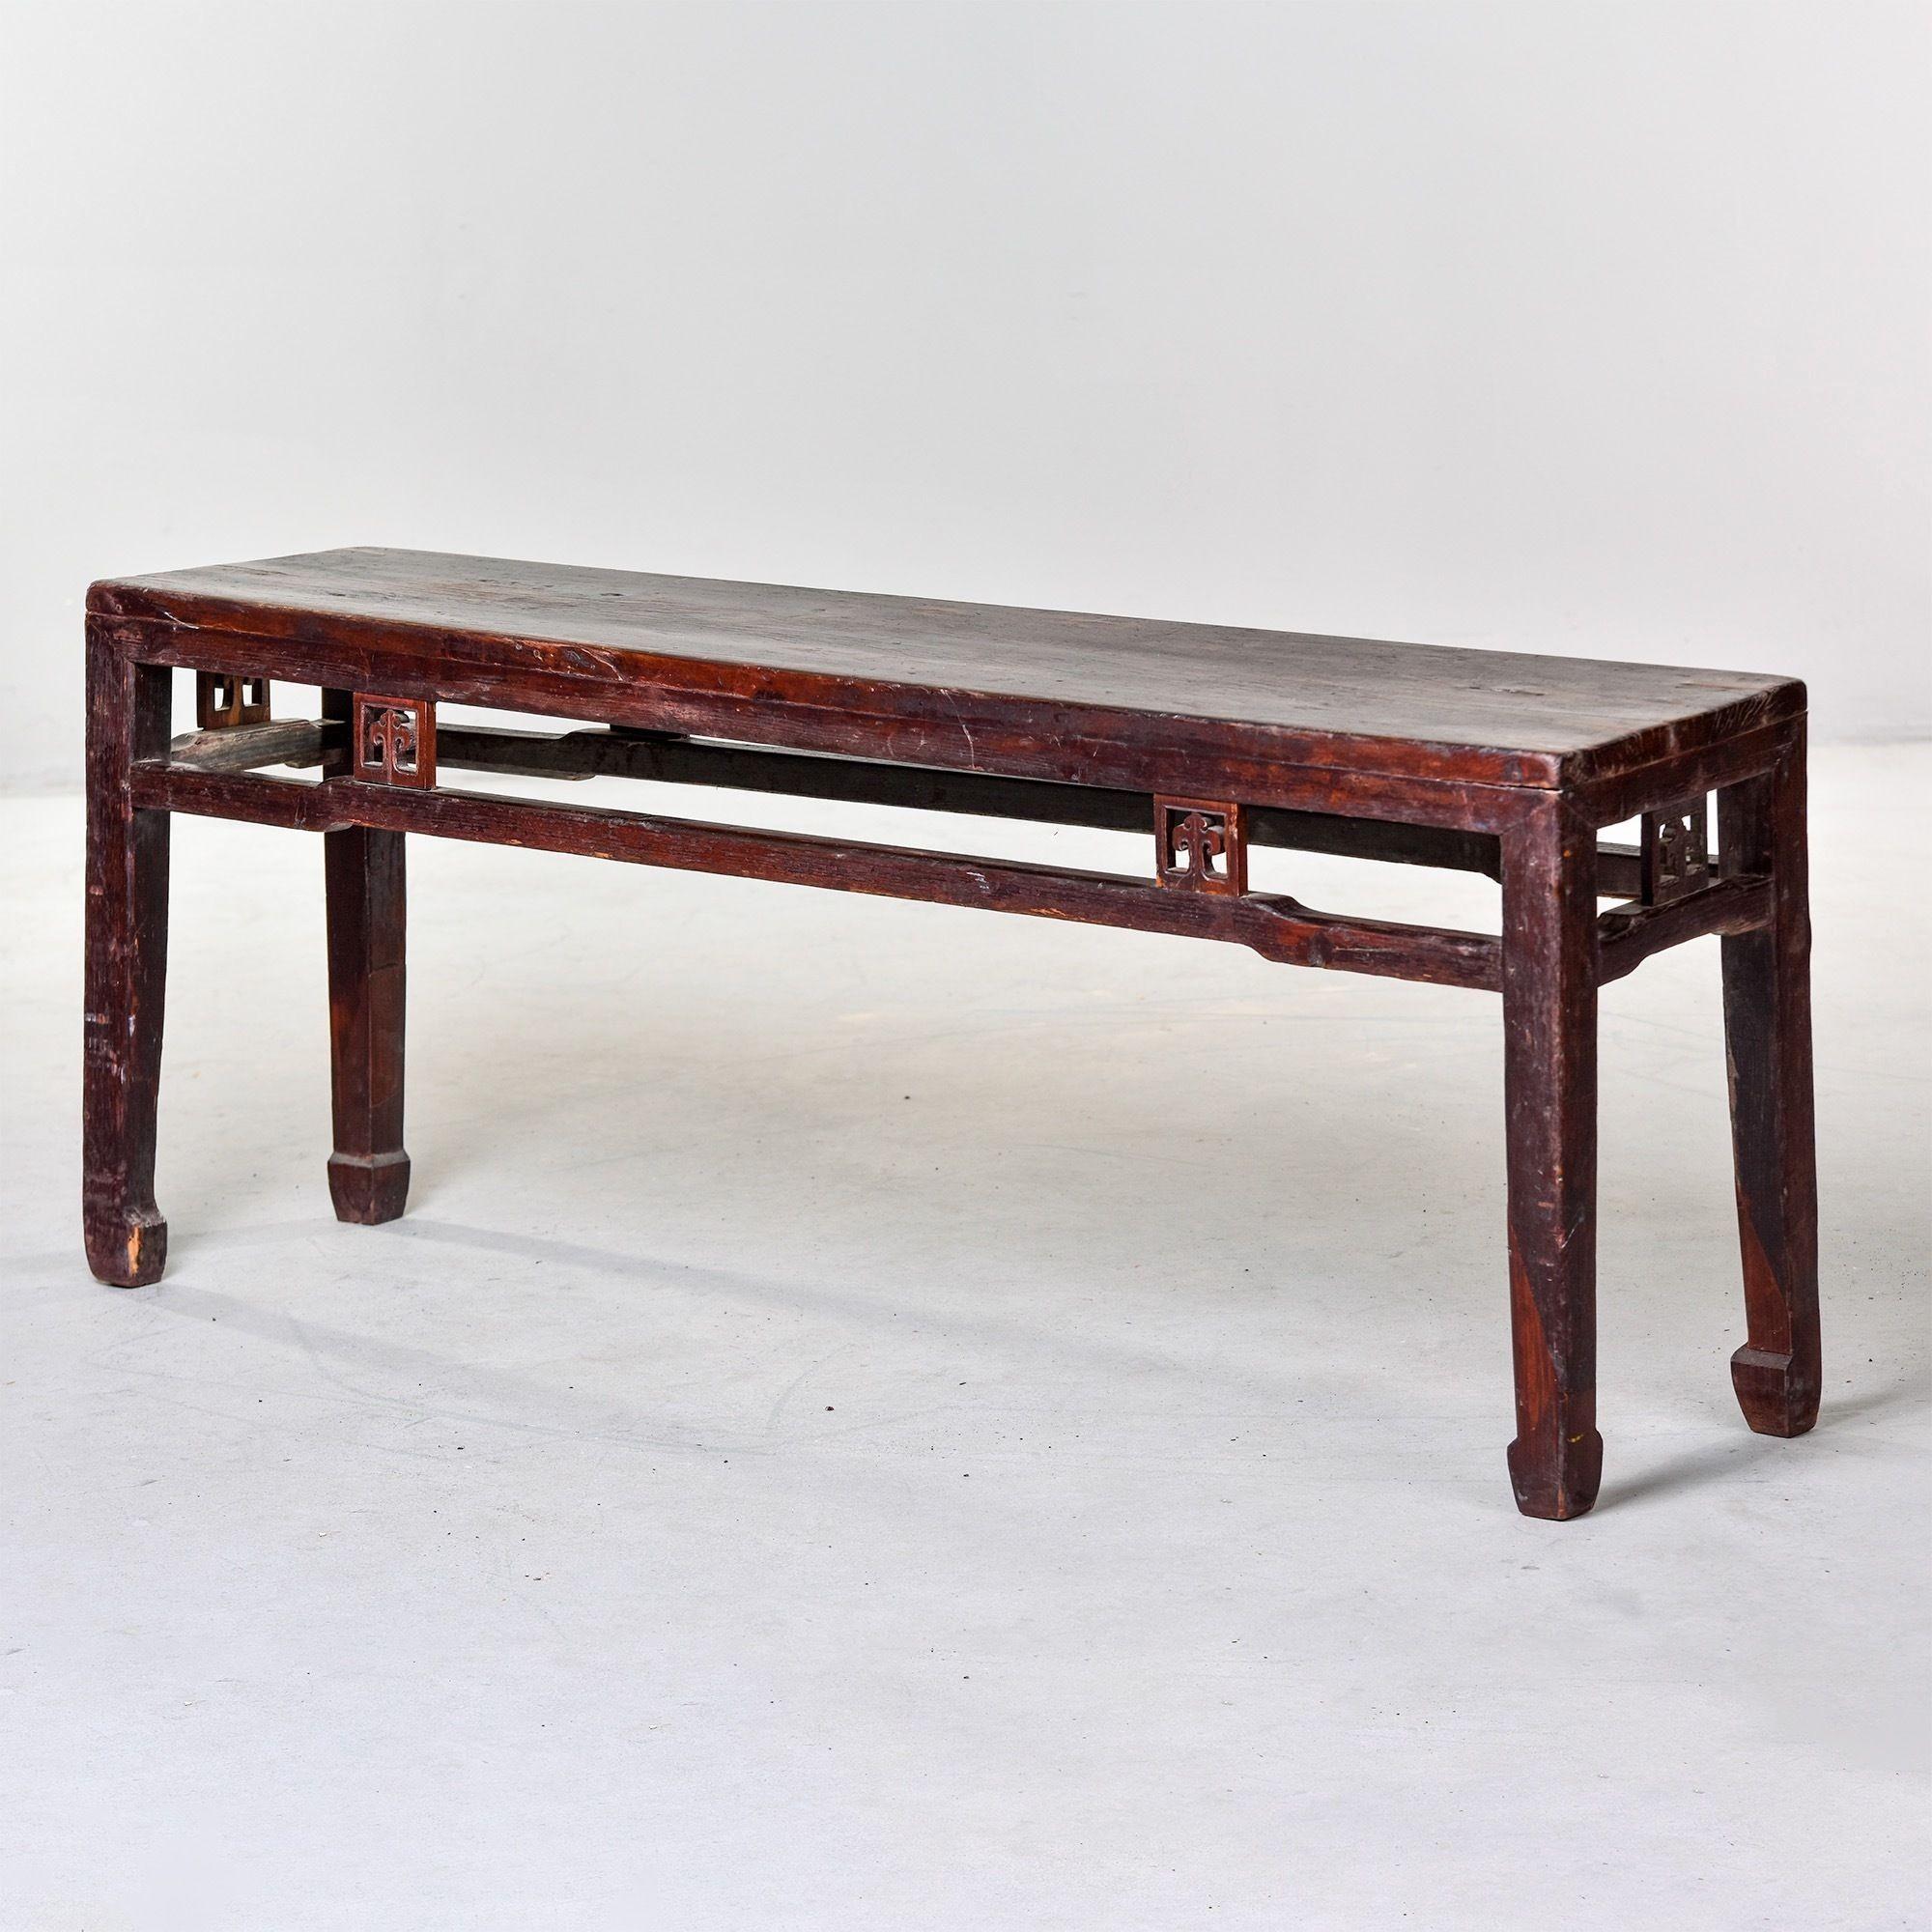 Circa 1900 long narrow Chinese elm wood bench from the Dong Yang region. Original finish shows great color, patina and wear. Open work carved details on the apron and sides. Very sturdy. Unknown maker.